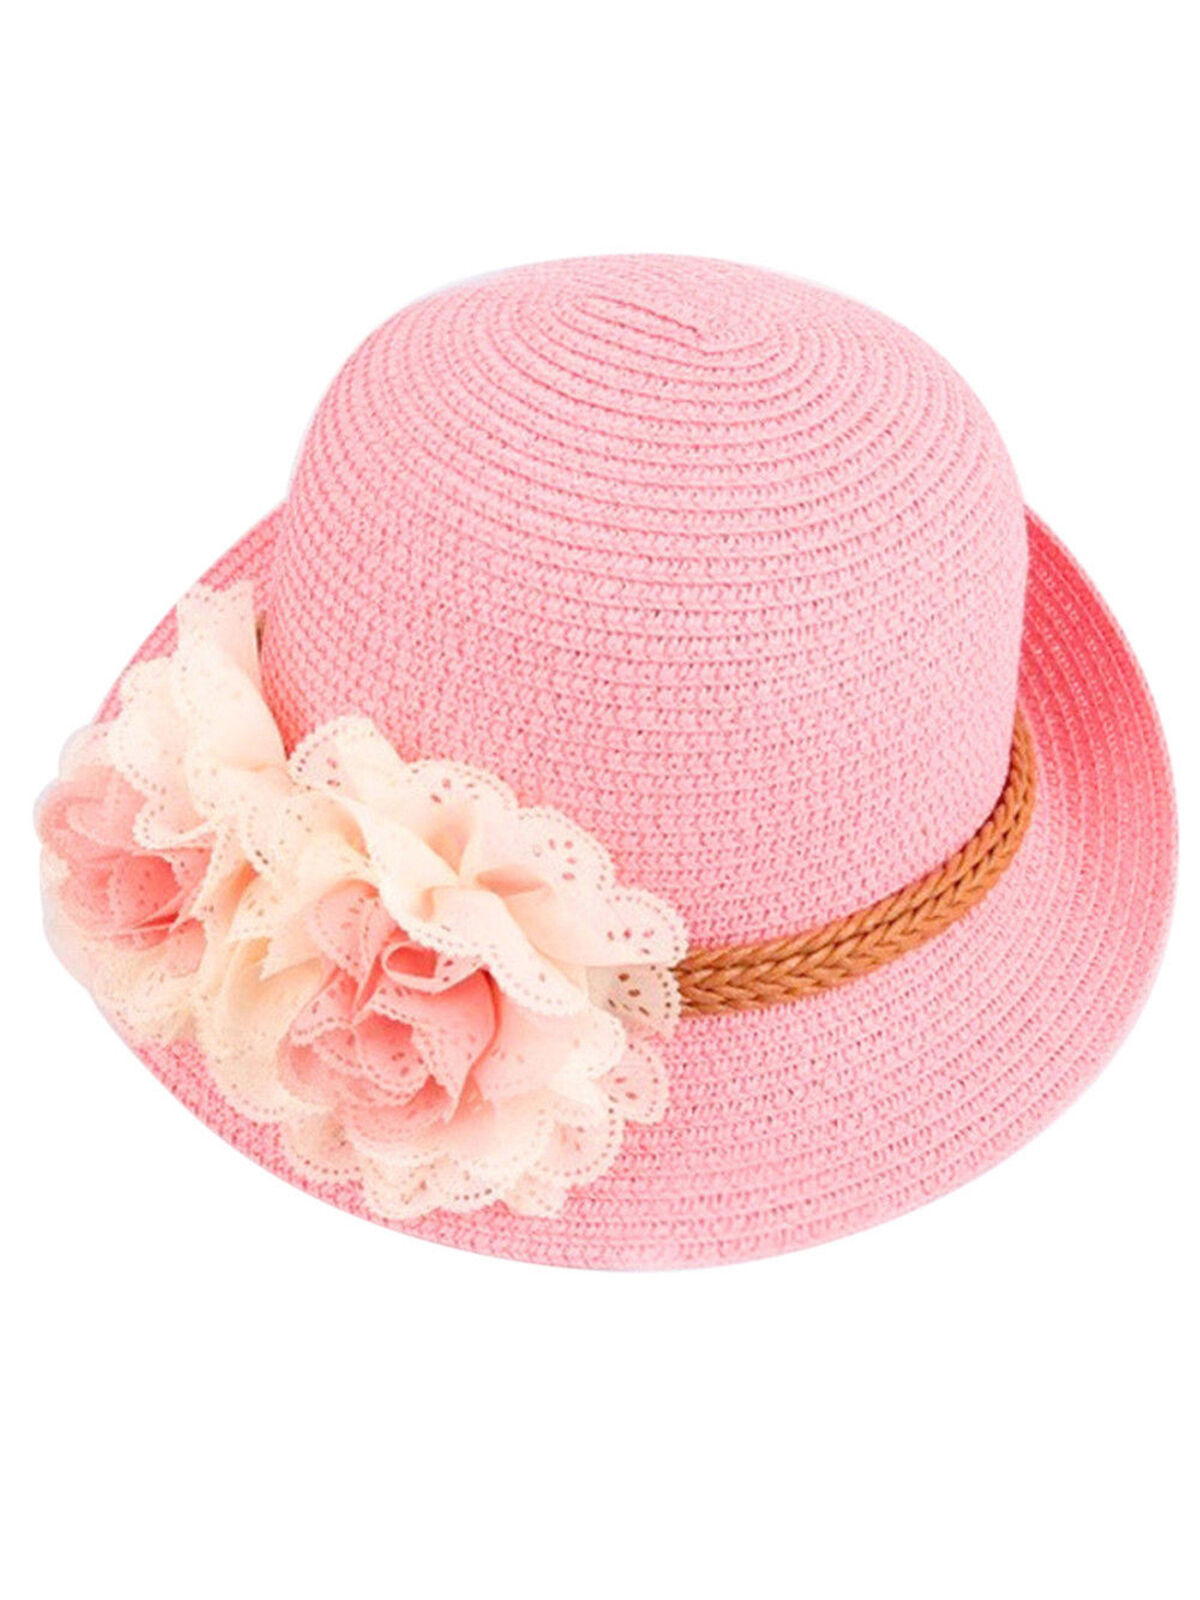 Toddler Baby Flower Decor Breathable Hat Straw Sun Hat Kids Hat Girls Hats - image 3 of 5